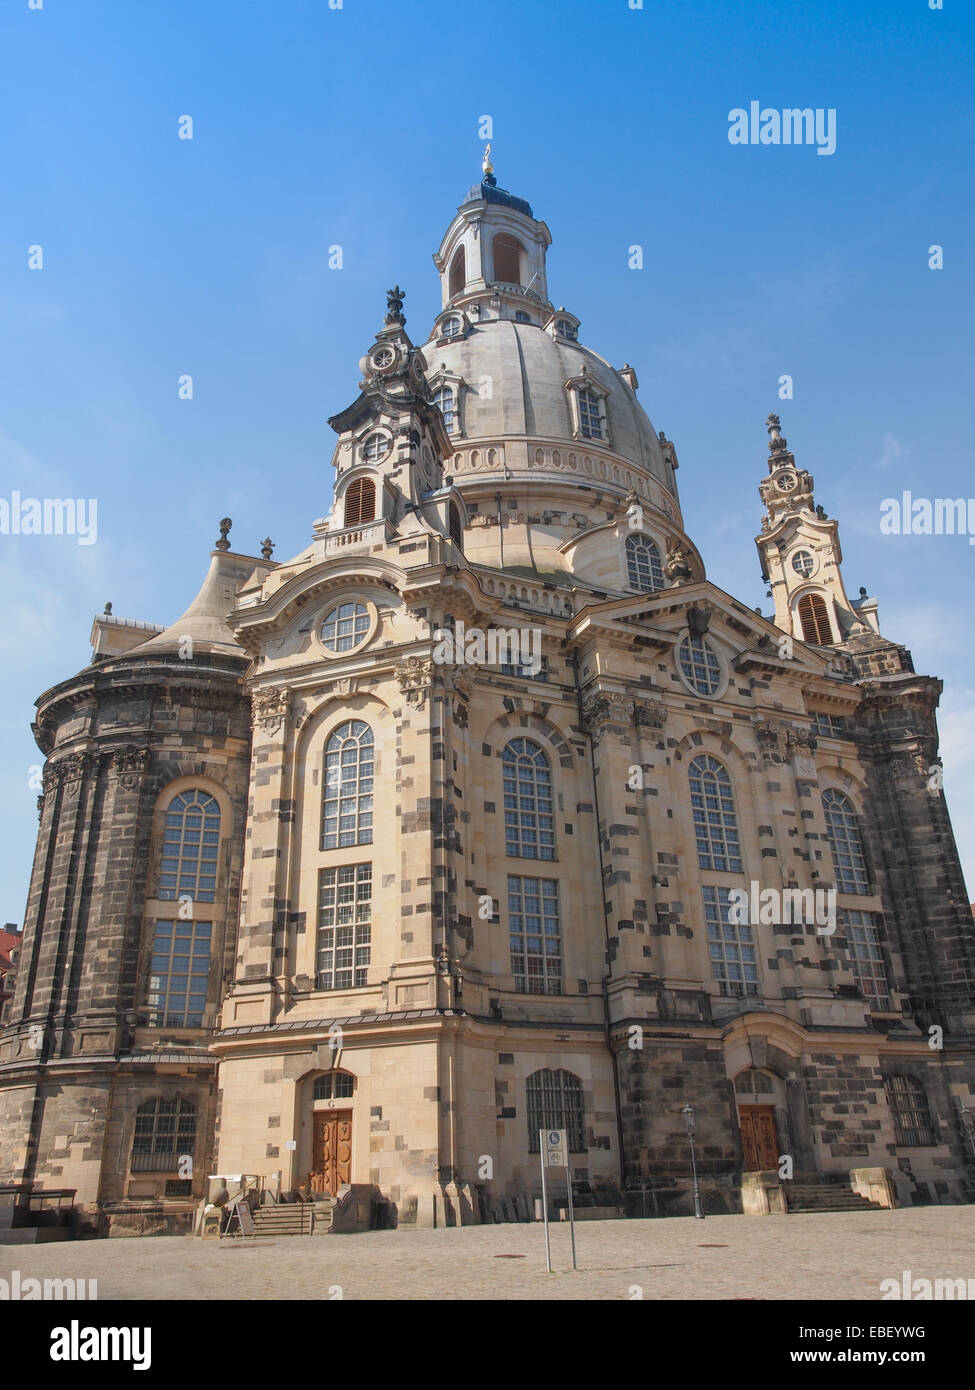 Dresdner Frauenkirche meaning Church of Our Lady in Dresden Germany Stock Photo